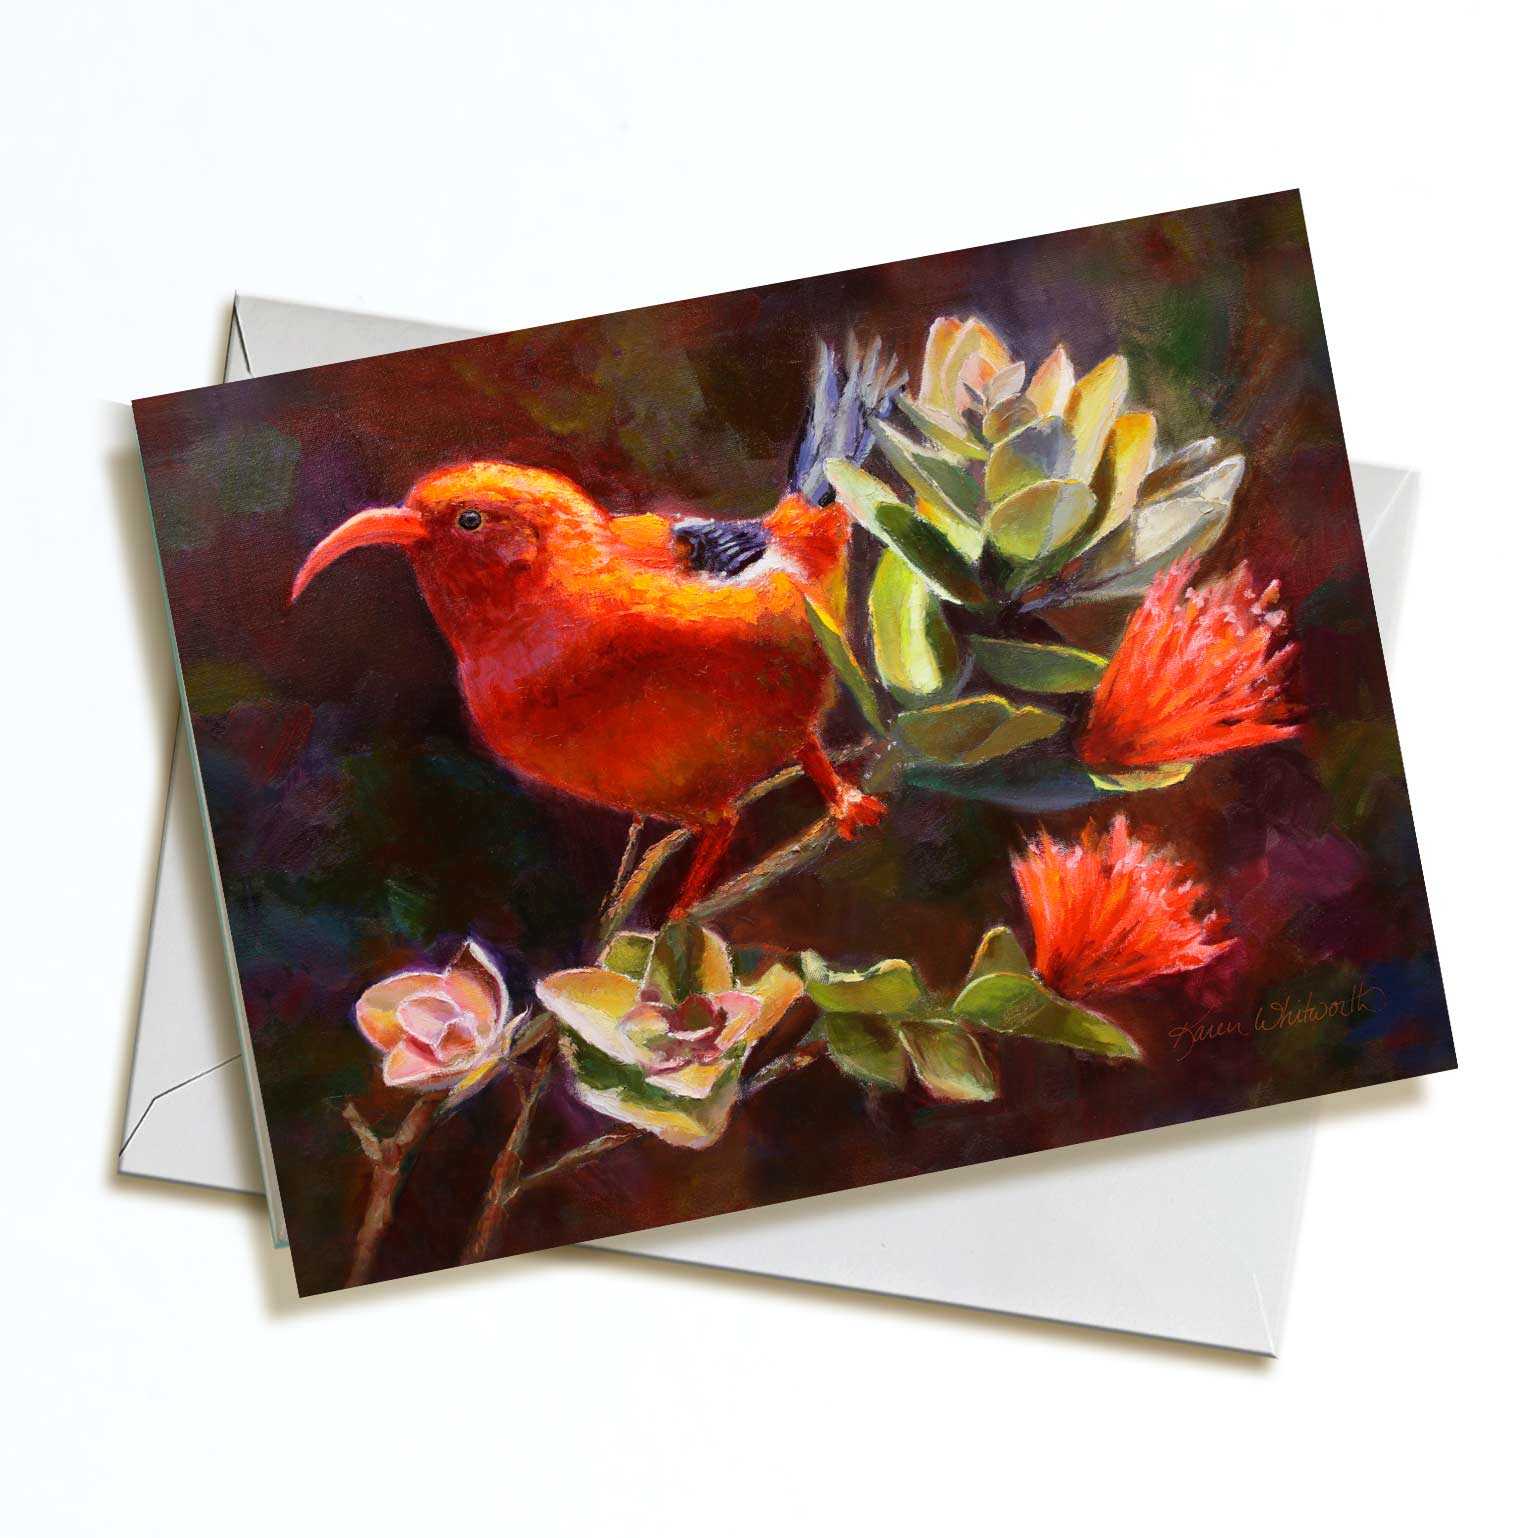 Hawaii note card featuring painting of Iiwi Bird and Ohia Lehua Flower against a white background